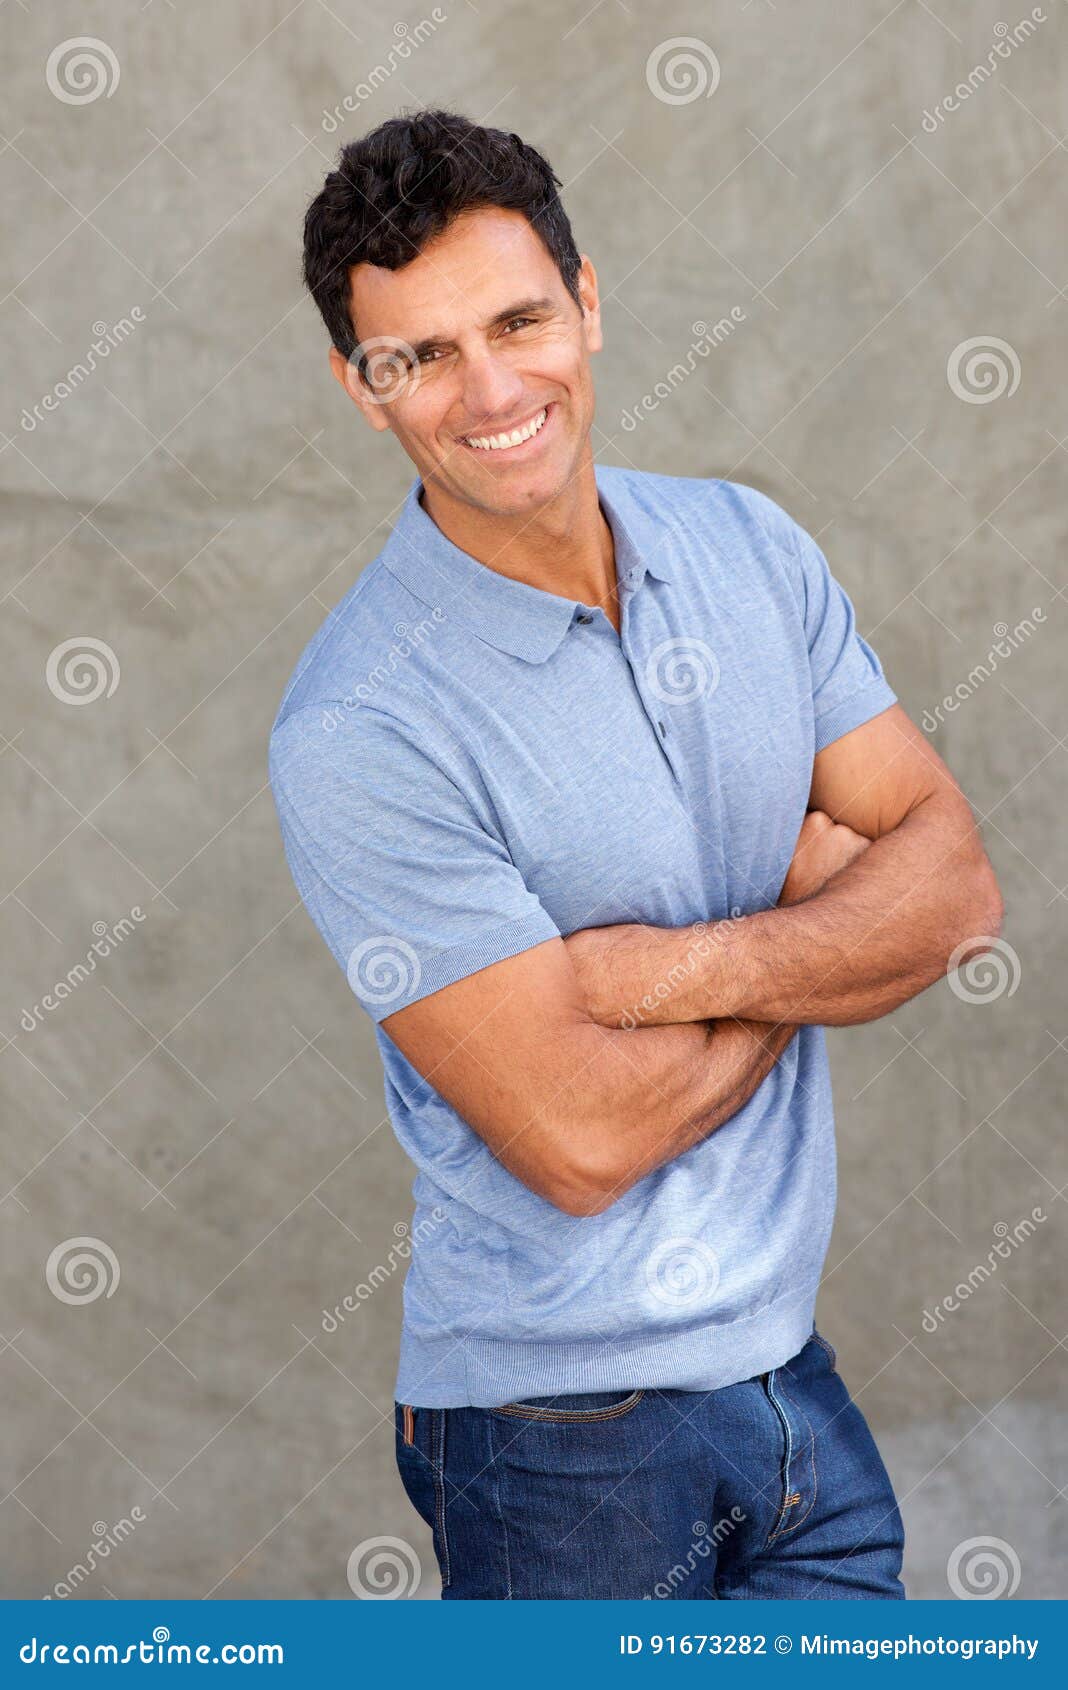 happy middle age man smiling with arms crossed